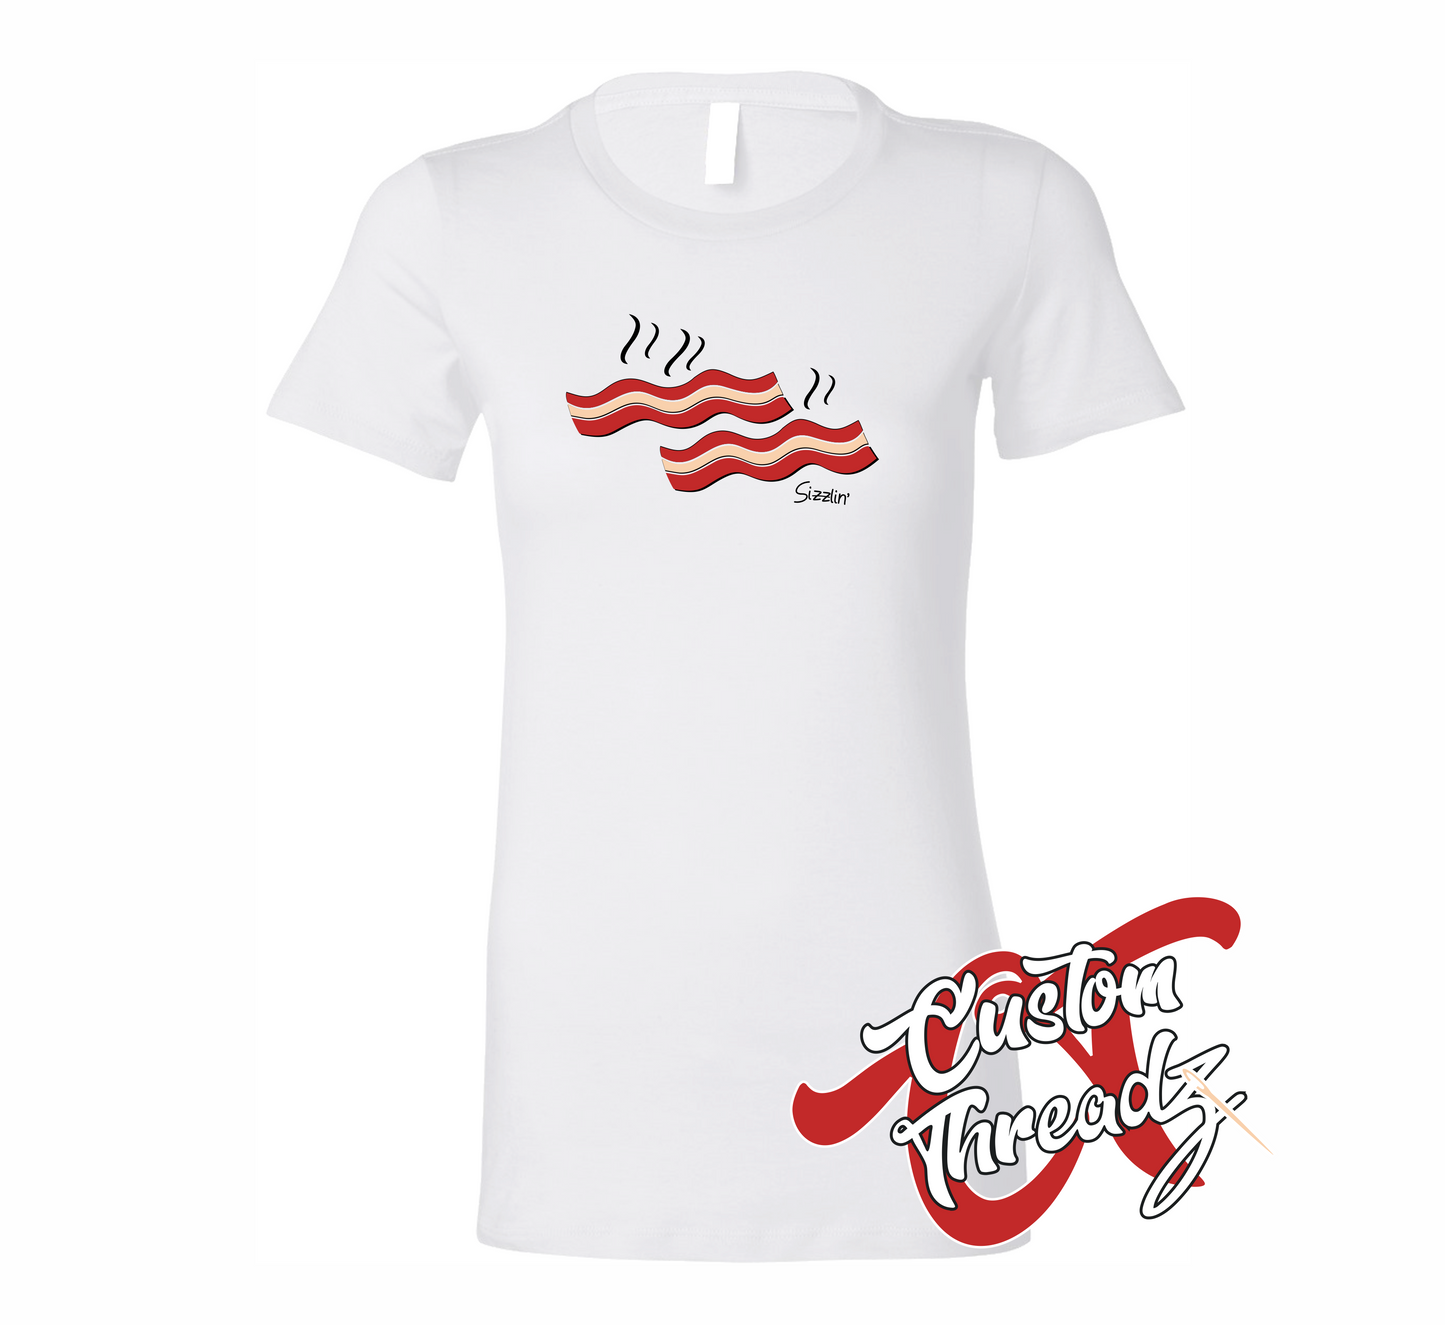 white womens tee with sizzlin bacon summer DTG printed design